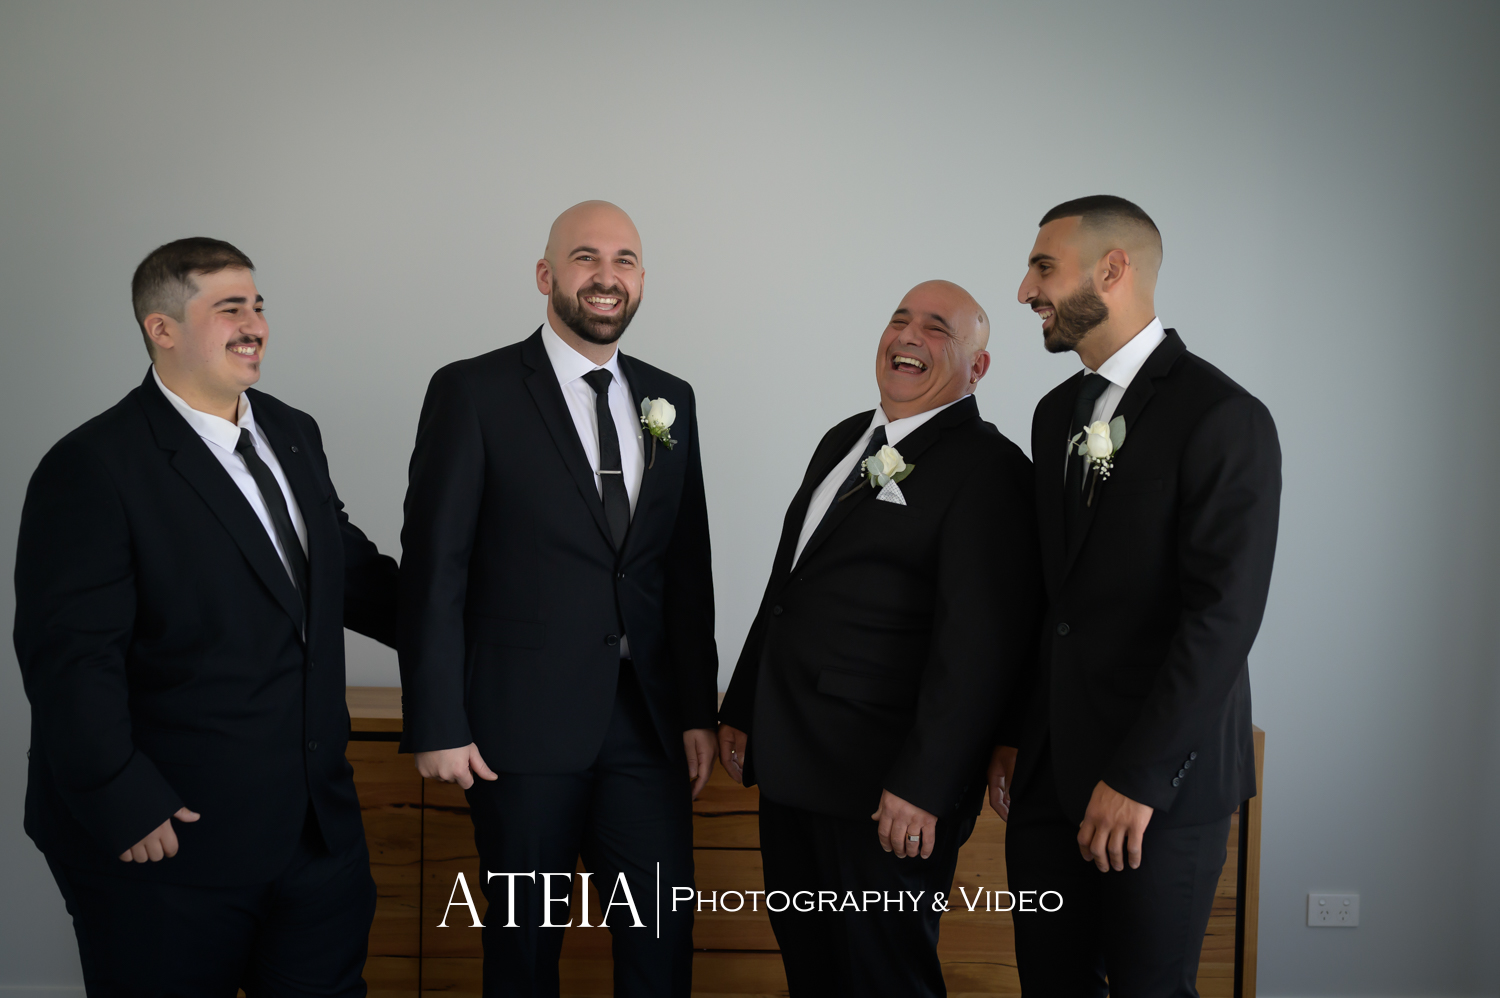 , Stephanie and Jason&#8217;s wedding at Marnong Estate Mickleham captured by ATEIA Photography &#038; Video